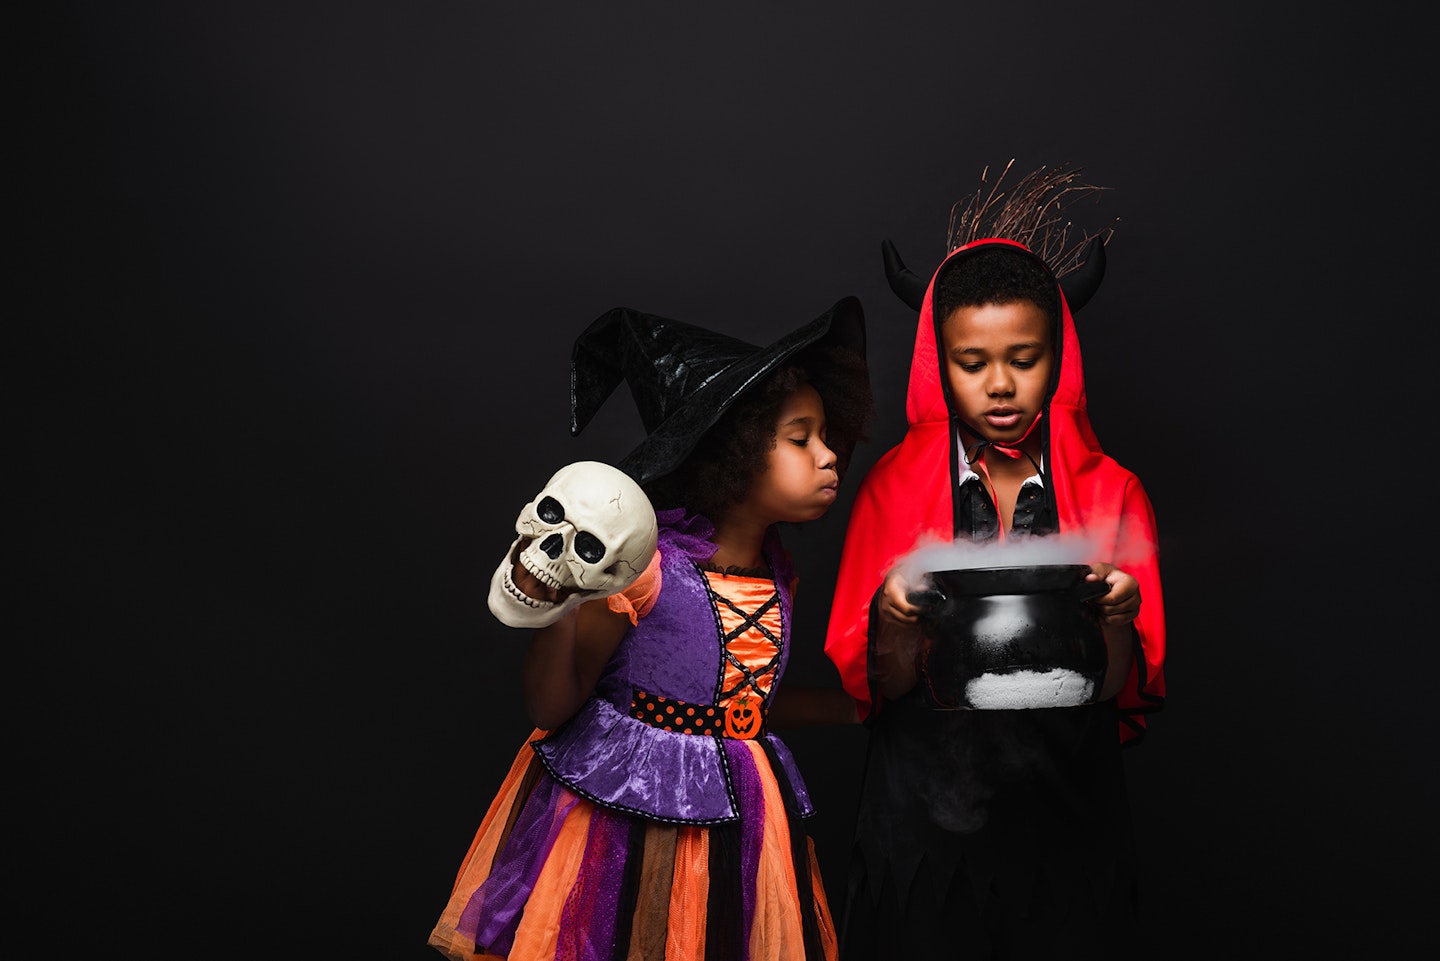 Boy and girl dressed as witches with cauldron